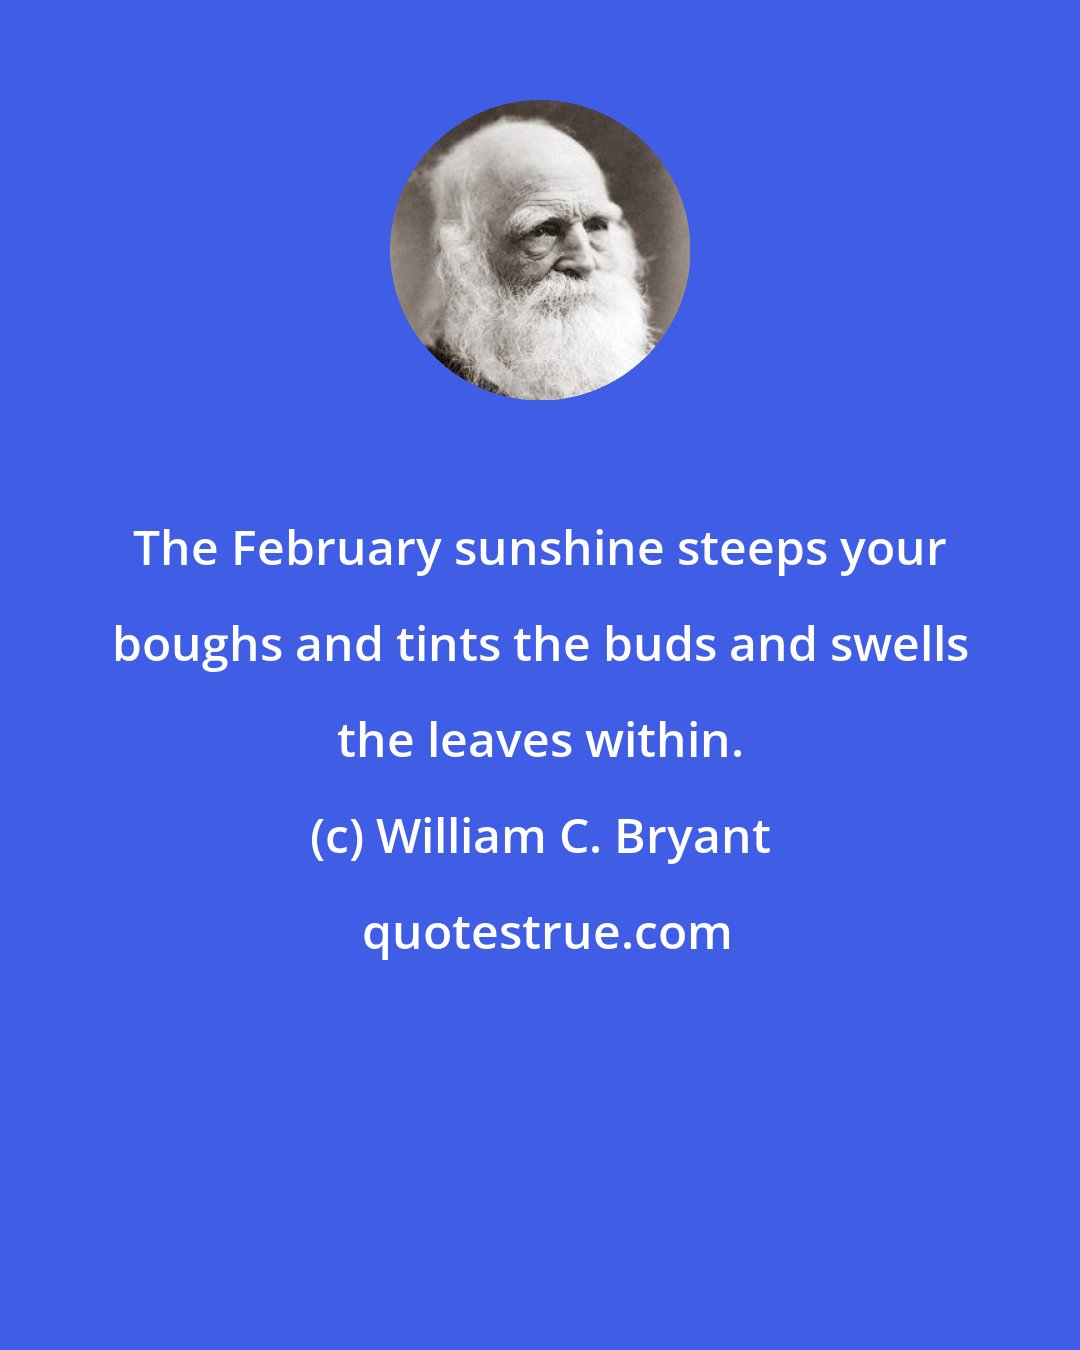 William C. Bryant: The February sunshine steeps your boughs and tints the buds and swells the leaves within.